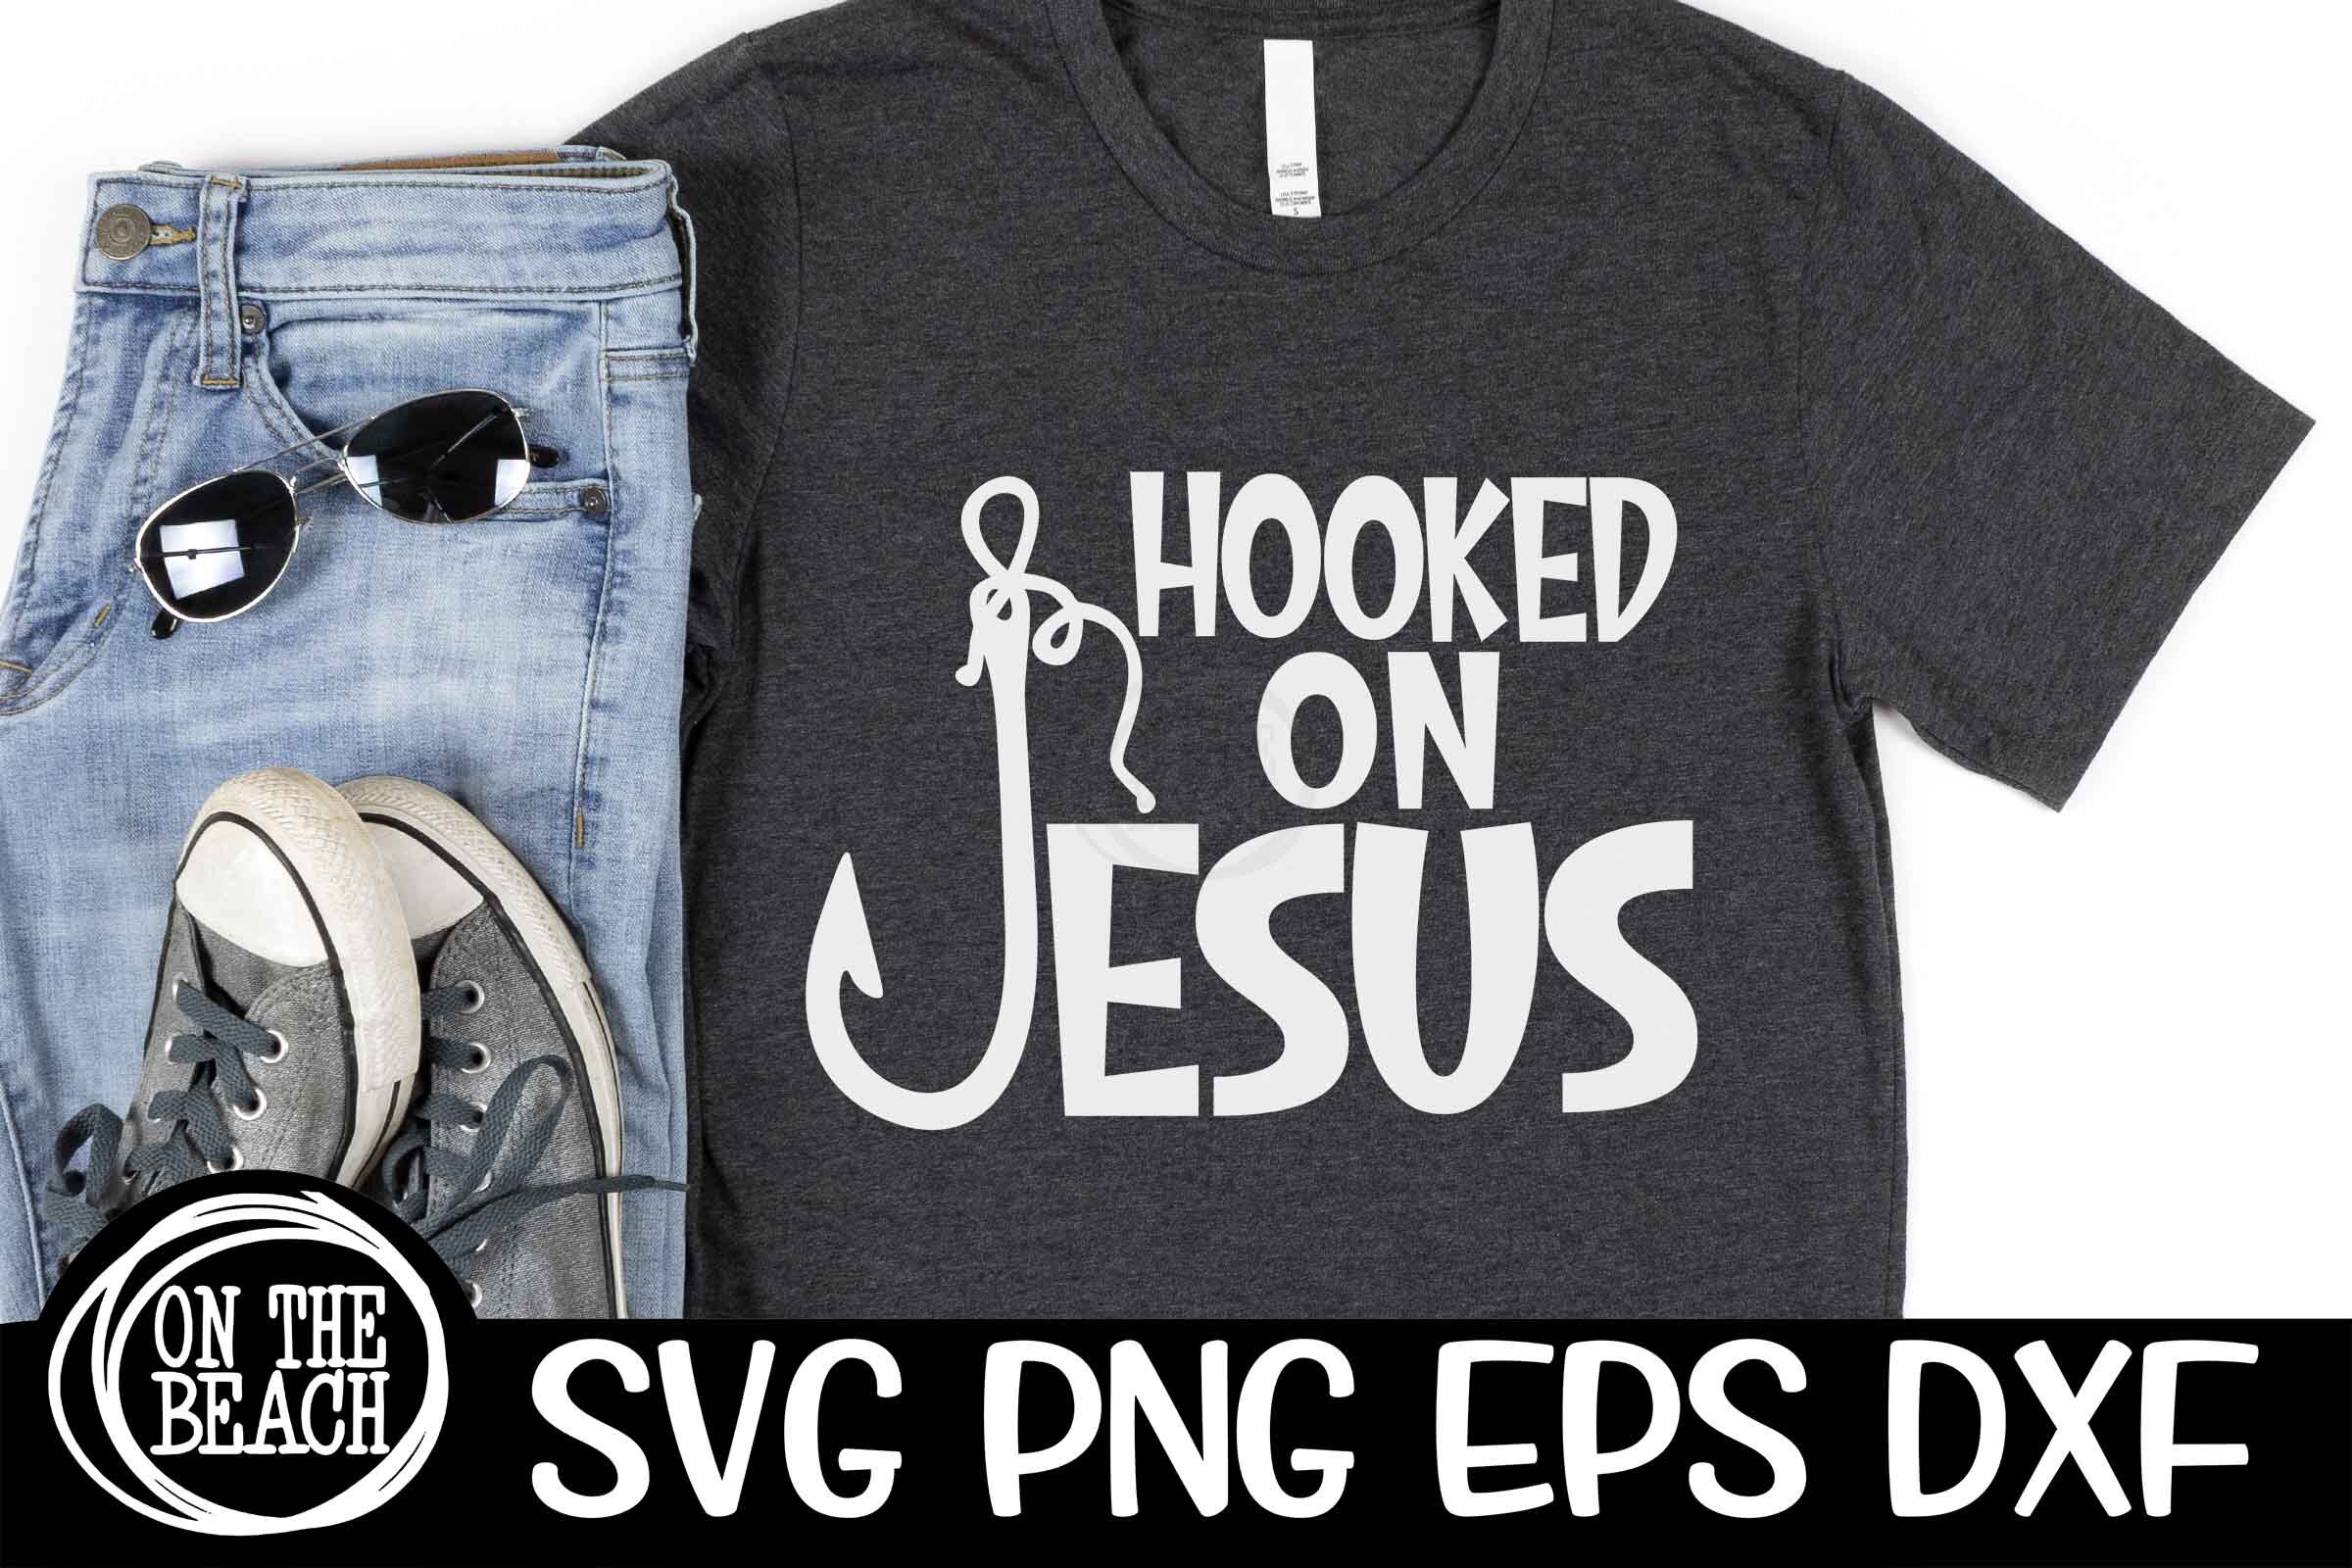 Hooked on Jesus SVG Graphic by spoonyprint · Creative Fabrica